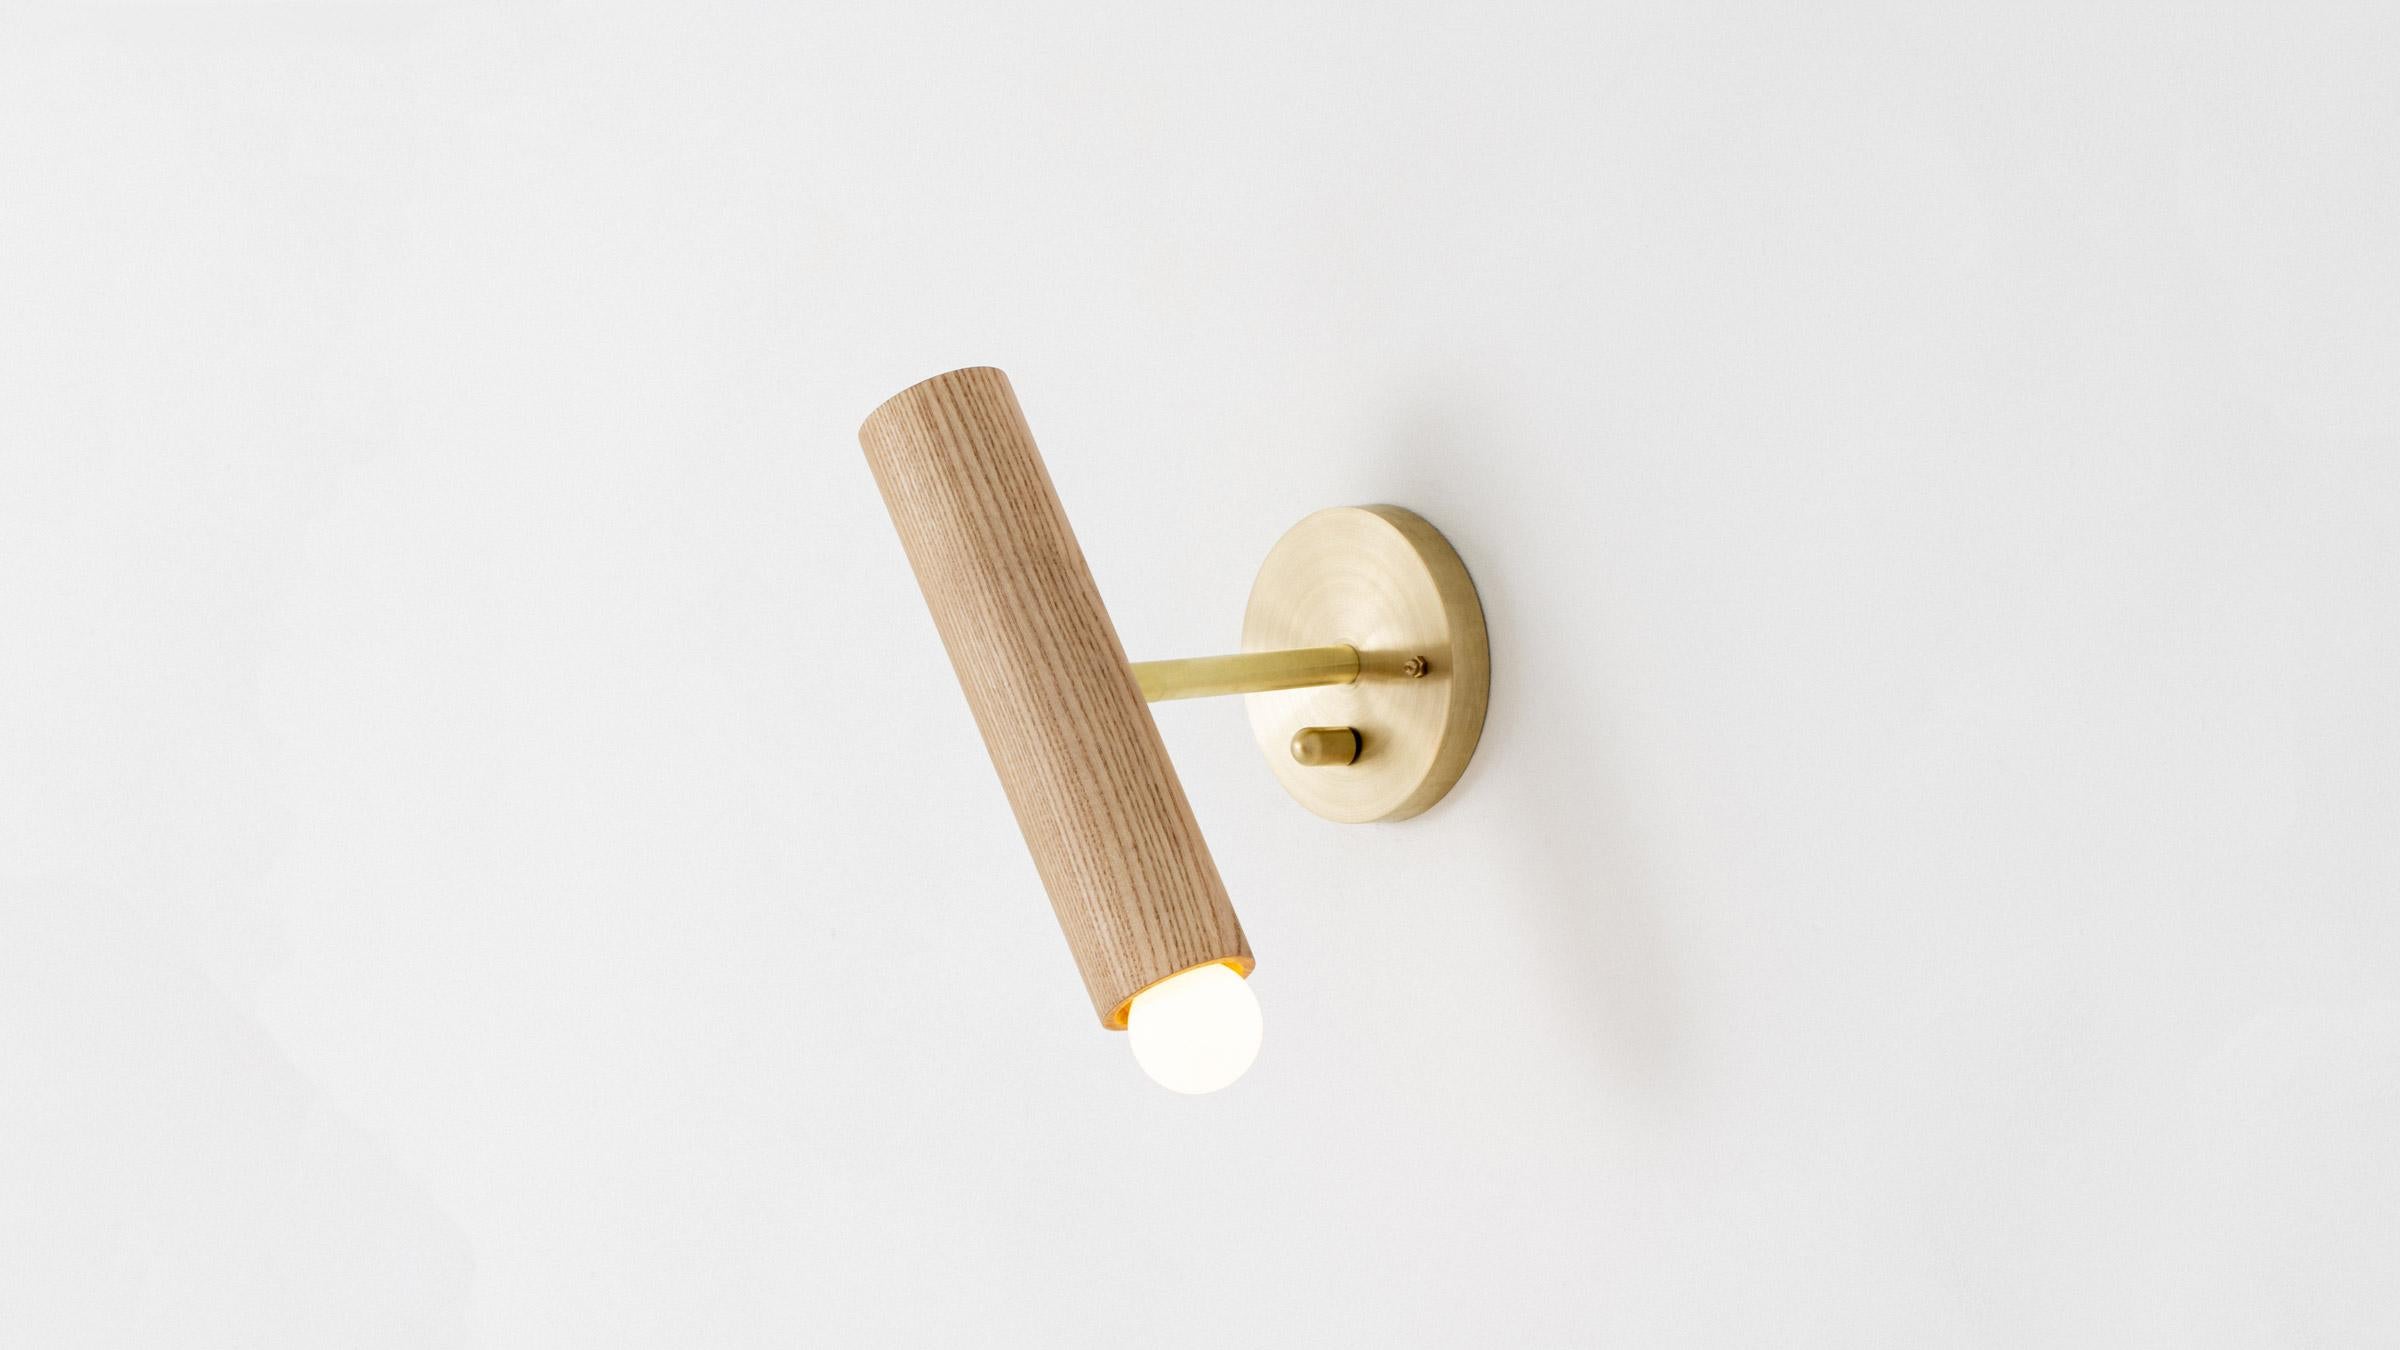 The lodge extension sconce projects the wooden lodge cylinder off the wall. An incorporated swivel creates comfortable bedside reading or task lighting. Made in the USA. UL Listed. Damp rated upon request.